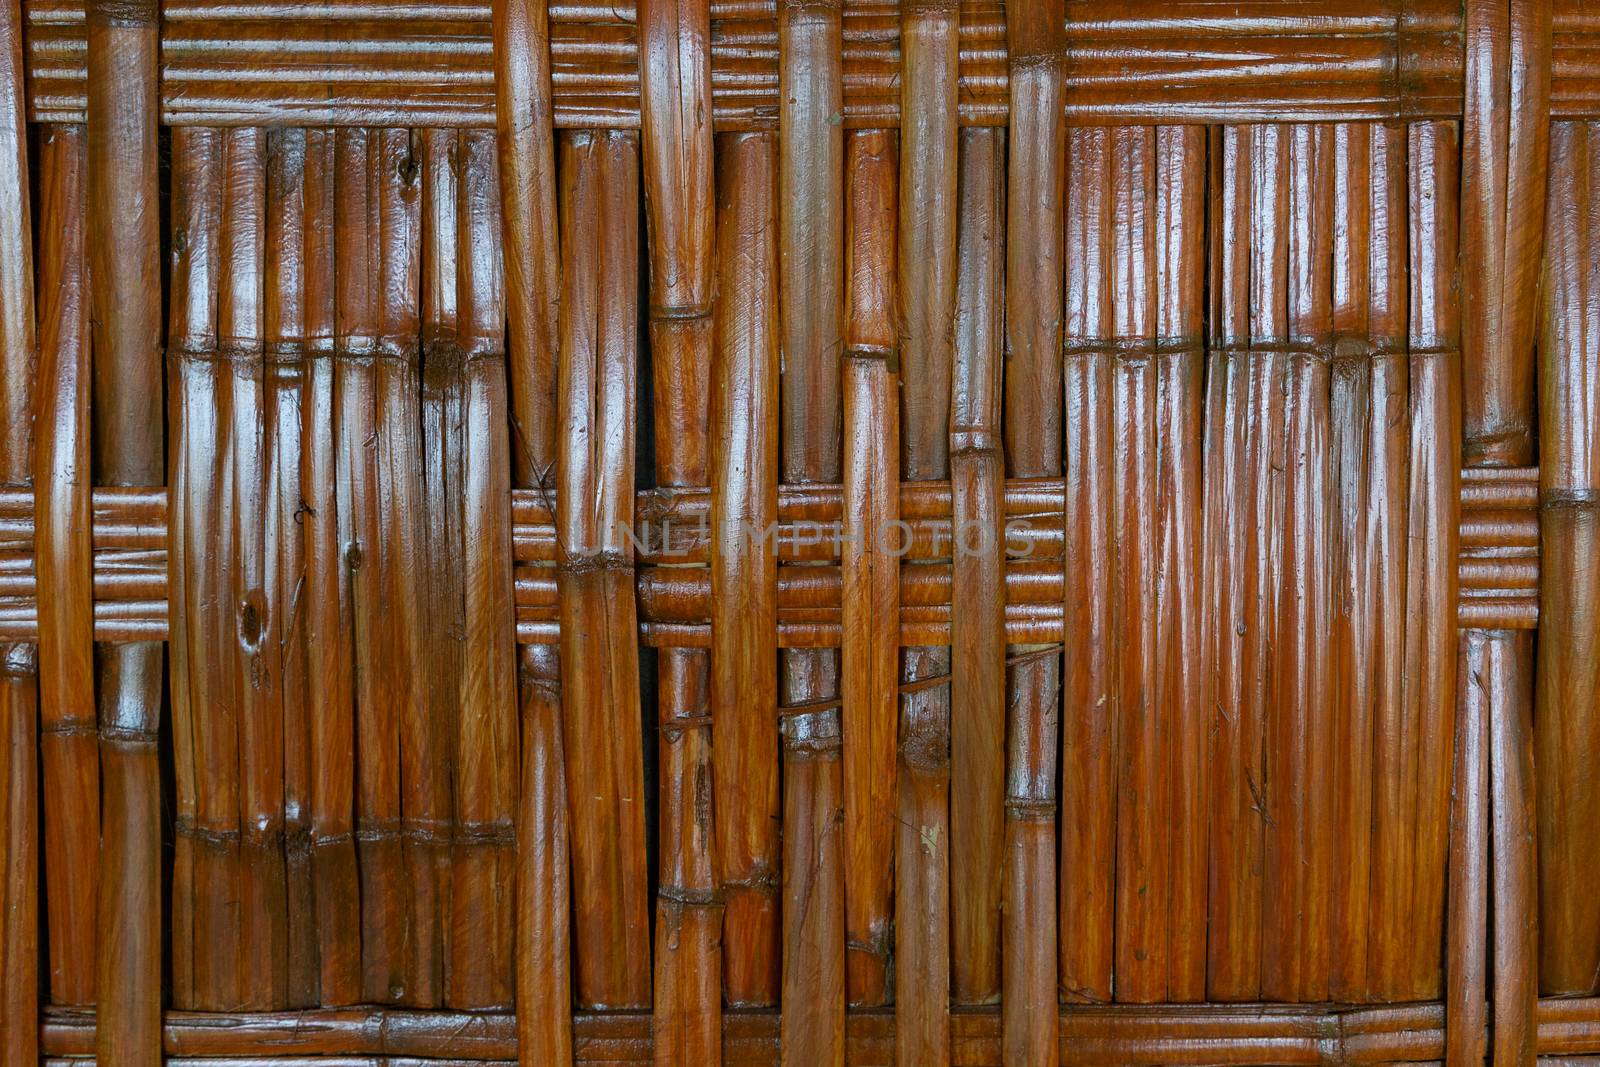 A Background from a wooden mesh or wood